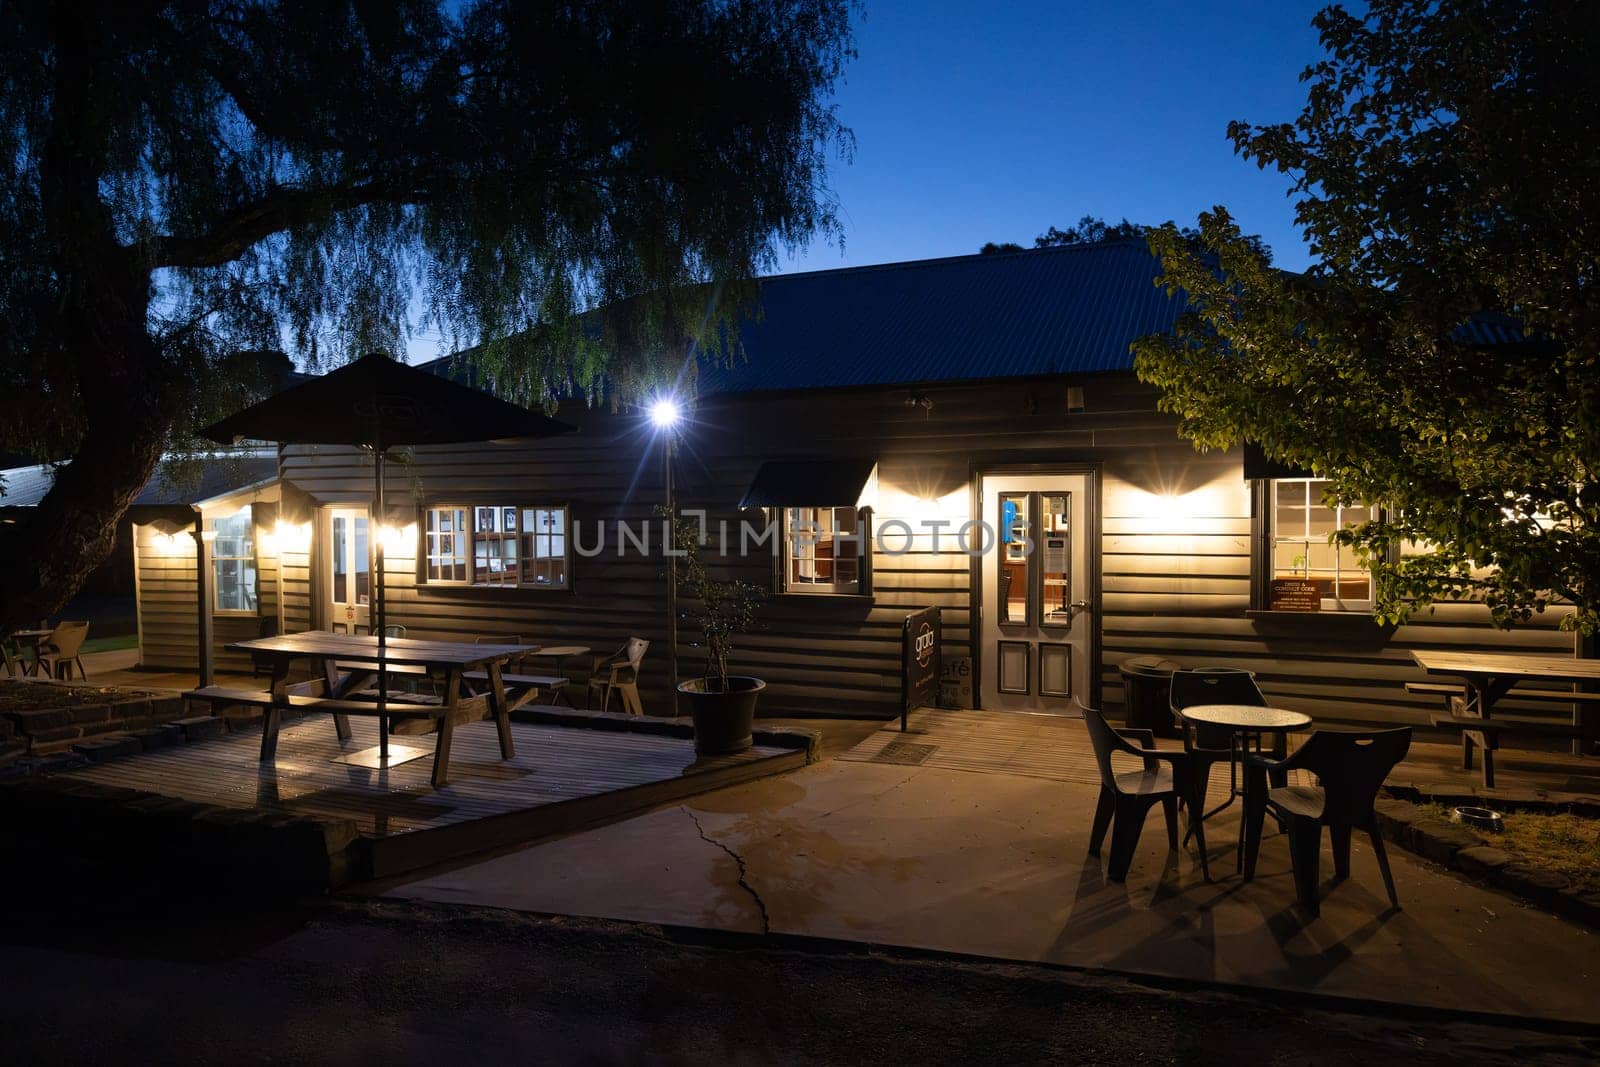 AXEDALE, AUSTRALIA - SEPTEMBER 24: Historic Victorian architecture of the Axedale Tavern on a warm spring evening in Axedale, Victoria, Australia in 2023